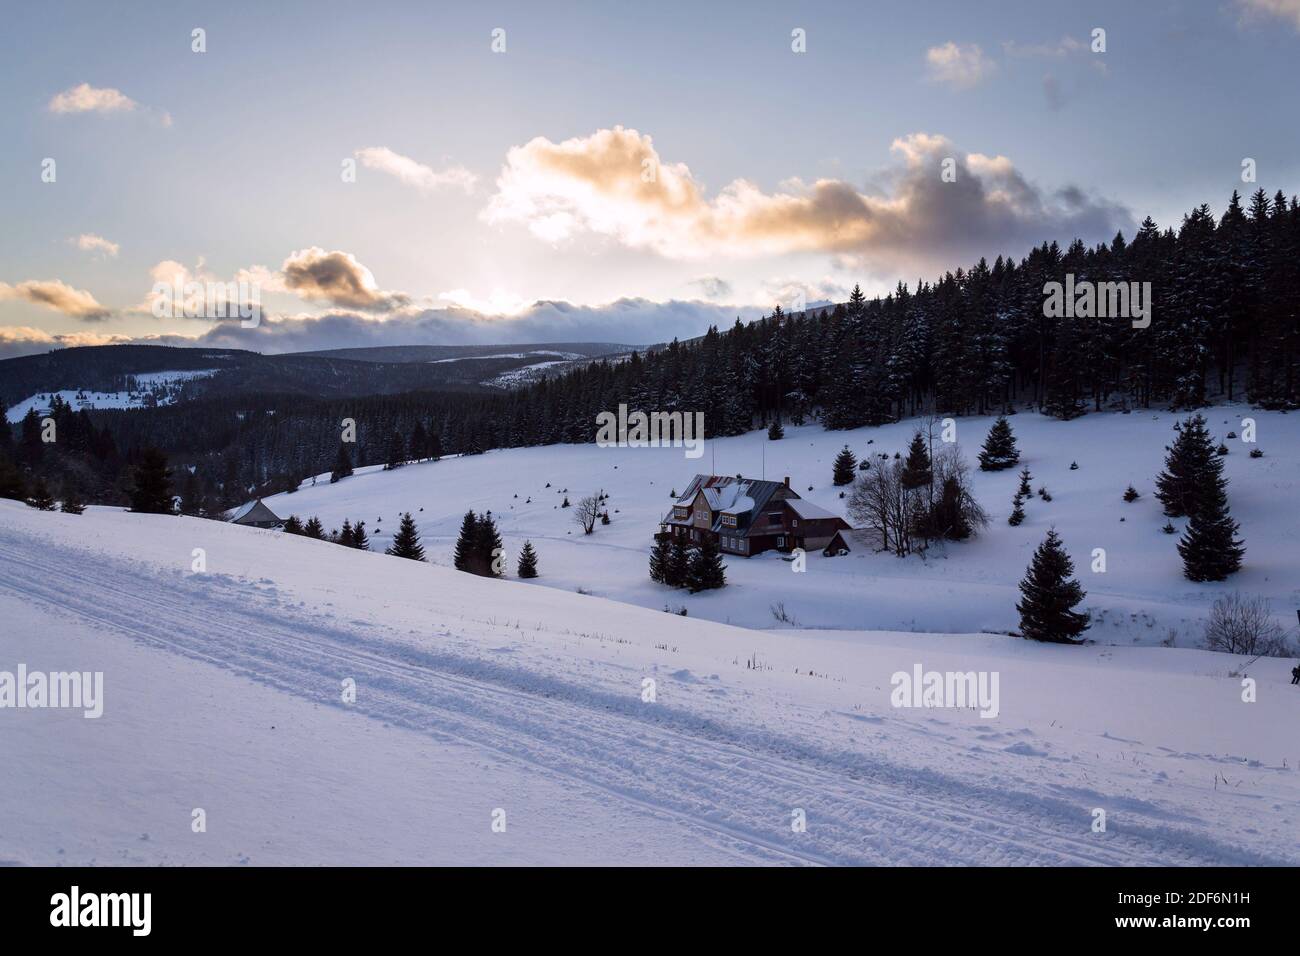 Snezka, the highest mountain in the Czech Republic, Krkonose Mountains, snowy winter day, Polish meteo observatory and Czech post office Postovna Stock Photo